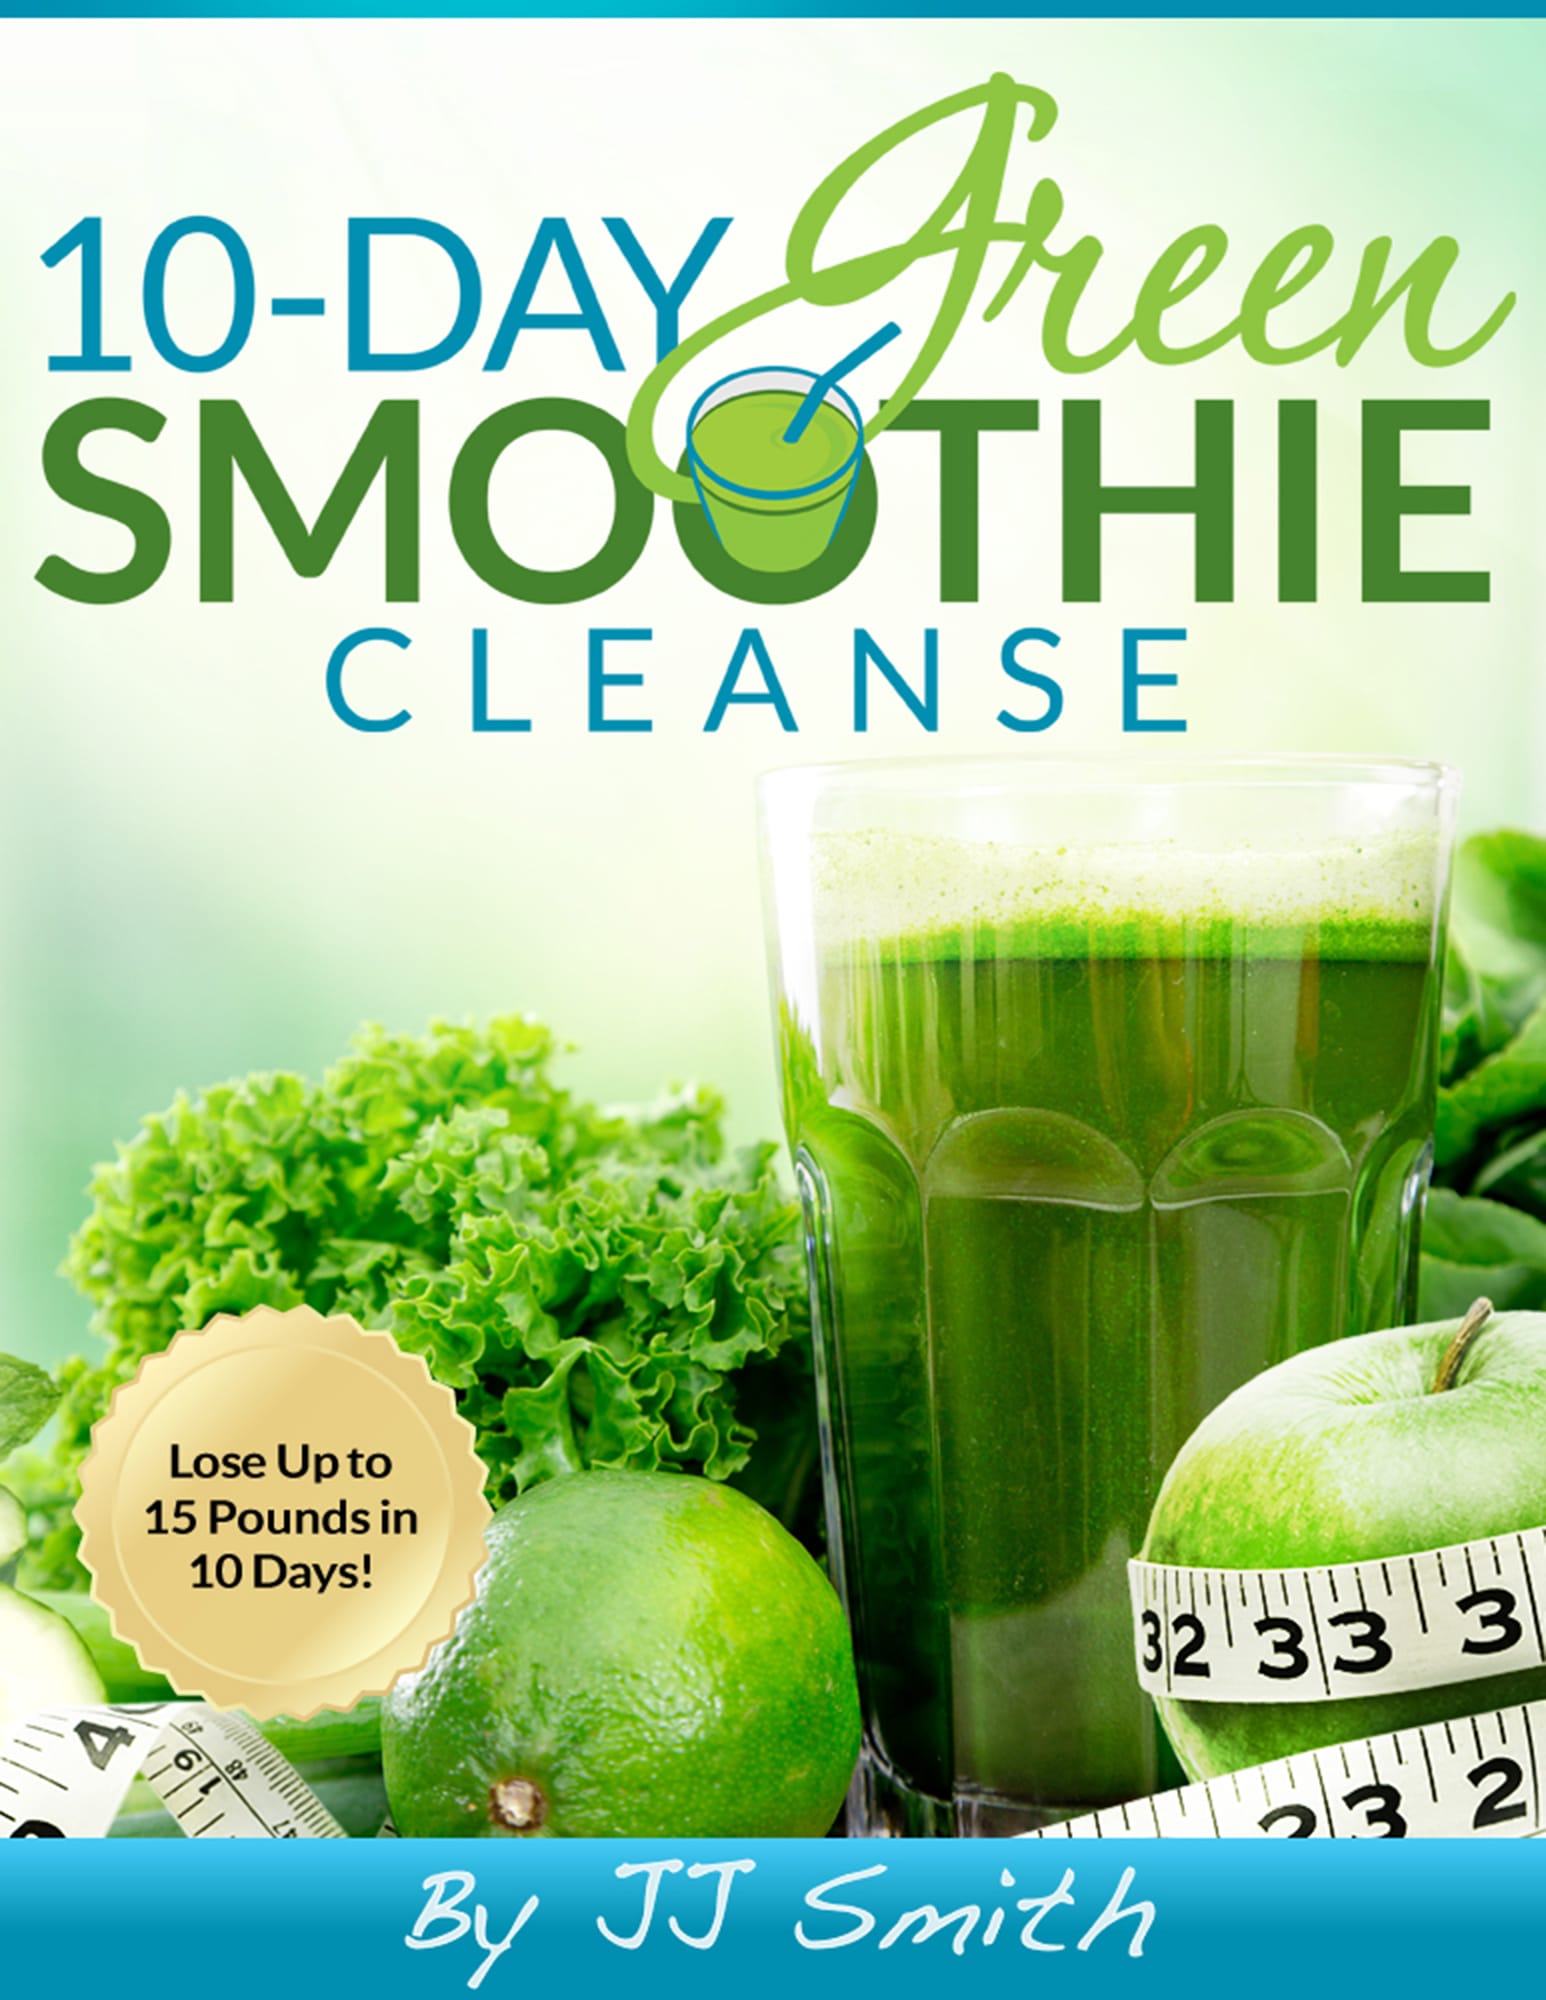 An estimated 20,000 people have completed the program in JJ Smith's &quot;10-Day Green Smoothie Cleanse.&quot;